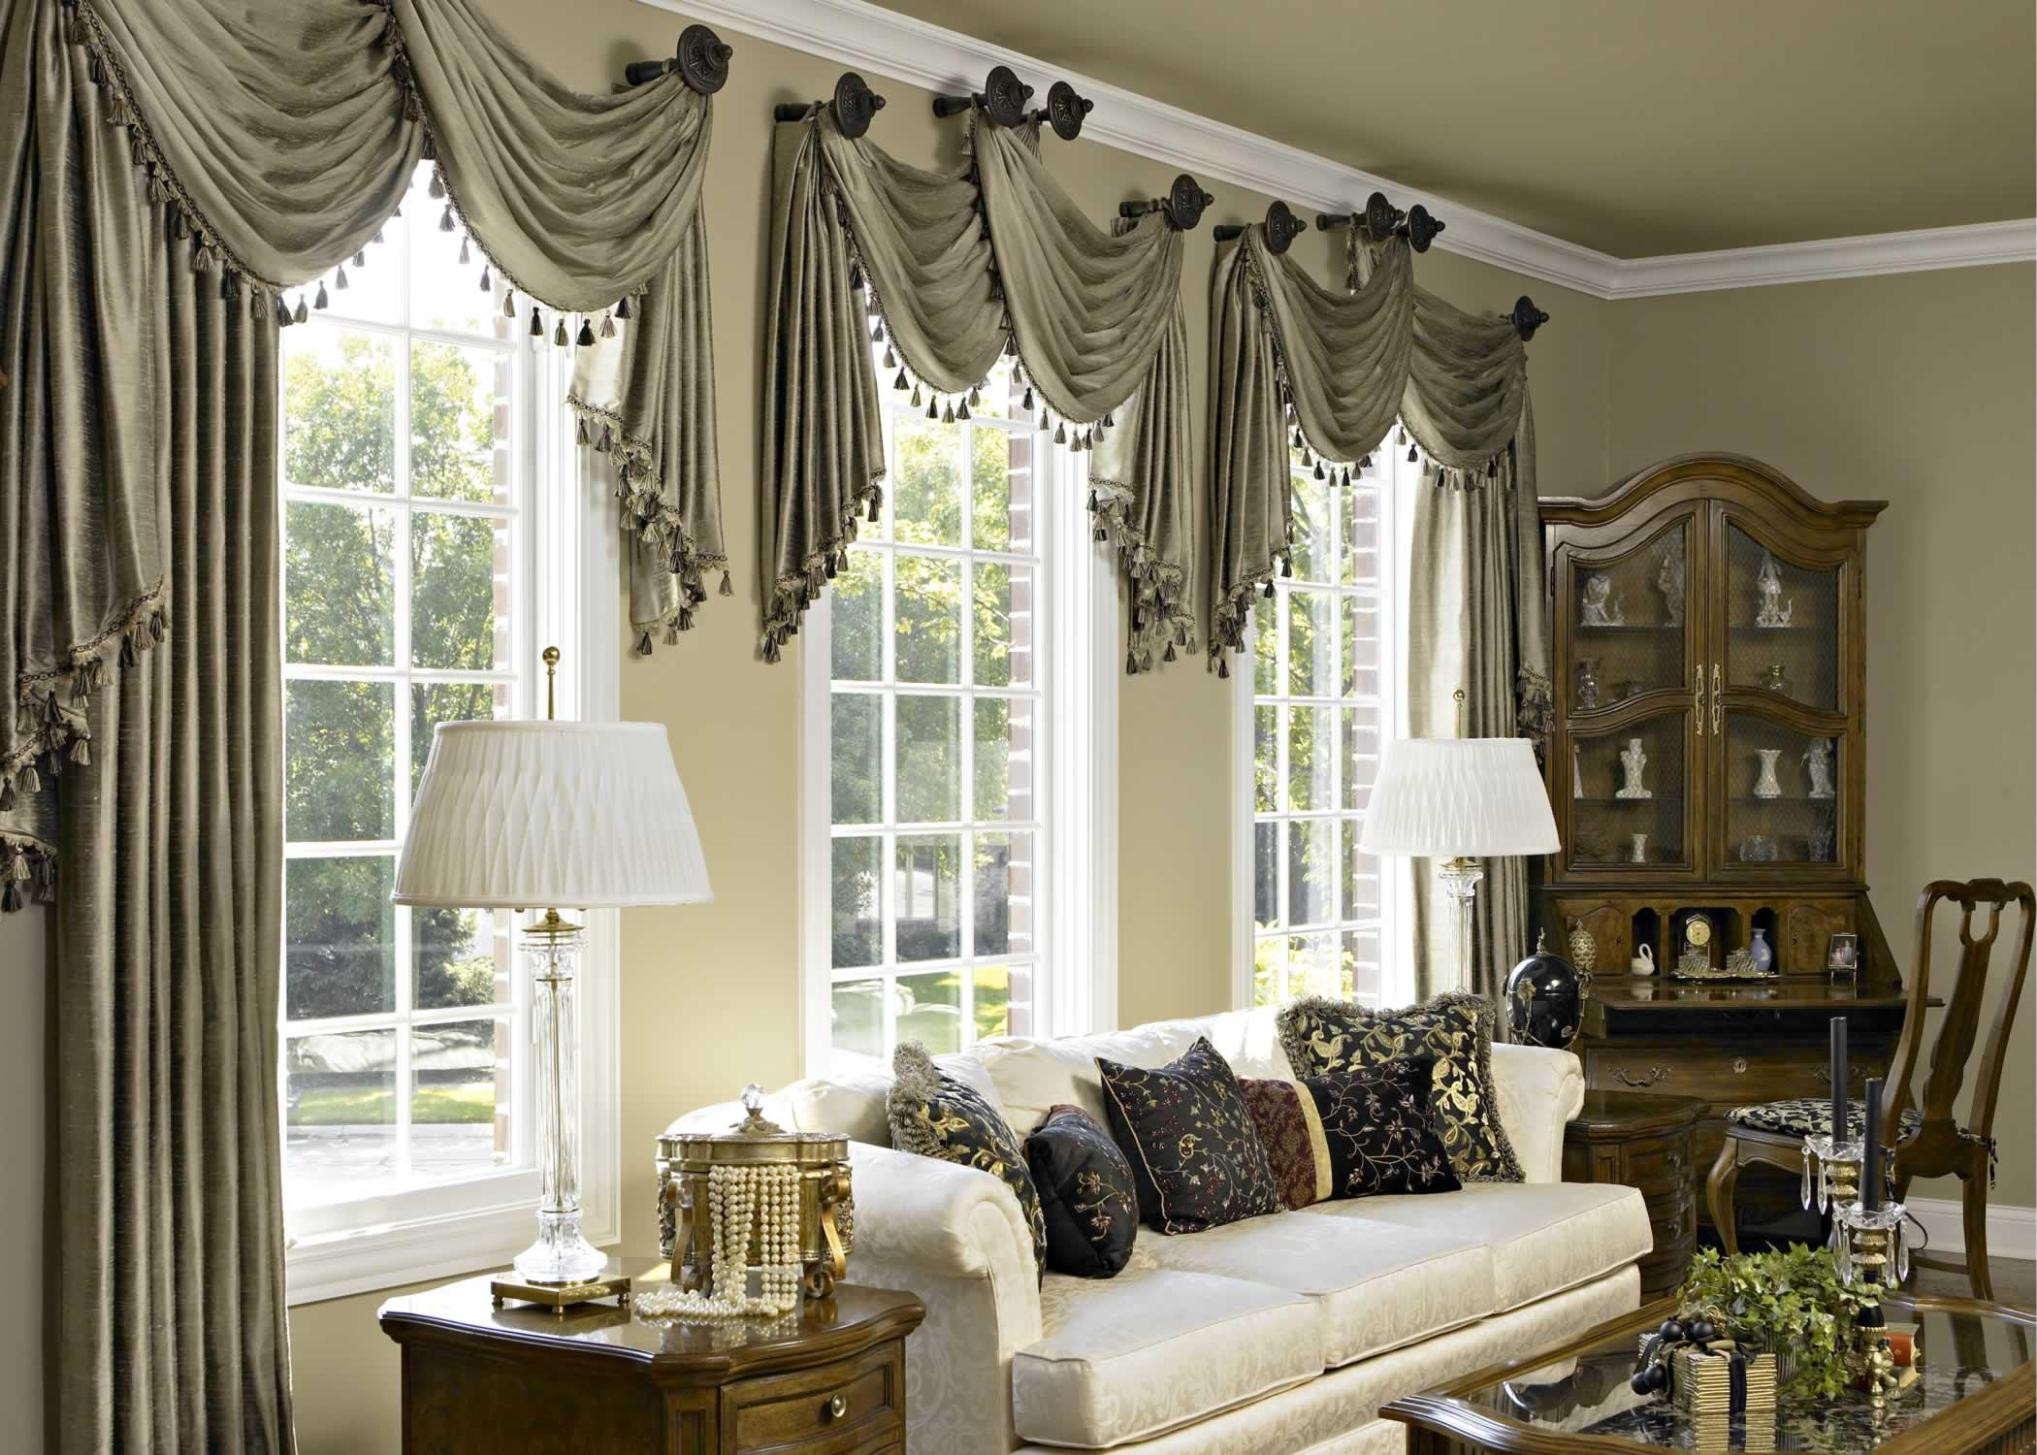 Jcpenney Living Room Curtains Beautiful Luxury Living Room Curtains Jcpenney Curtain Ideas Mini Of Jcpenney Living Room Curtains 